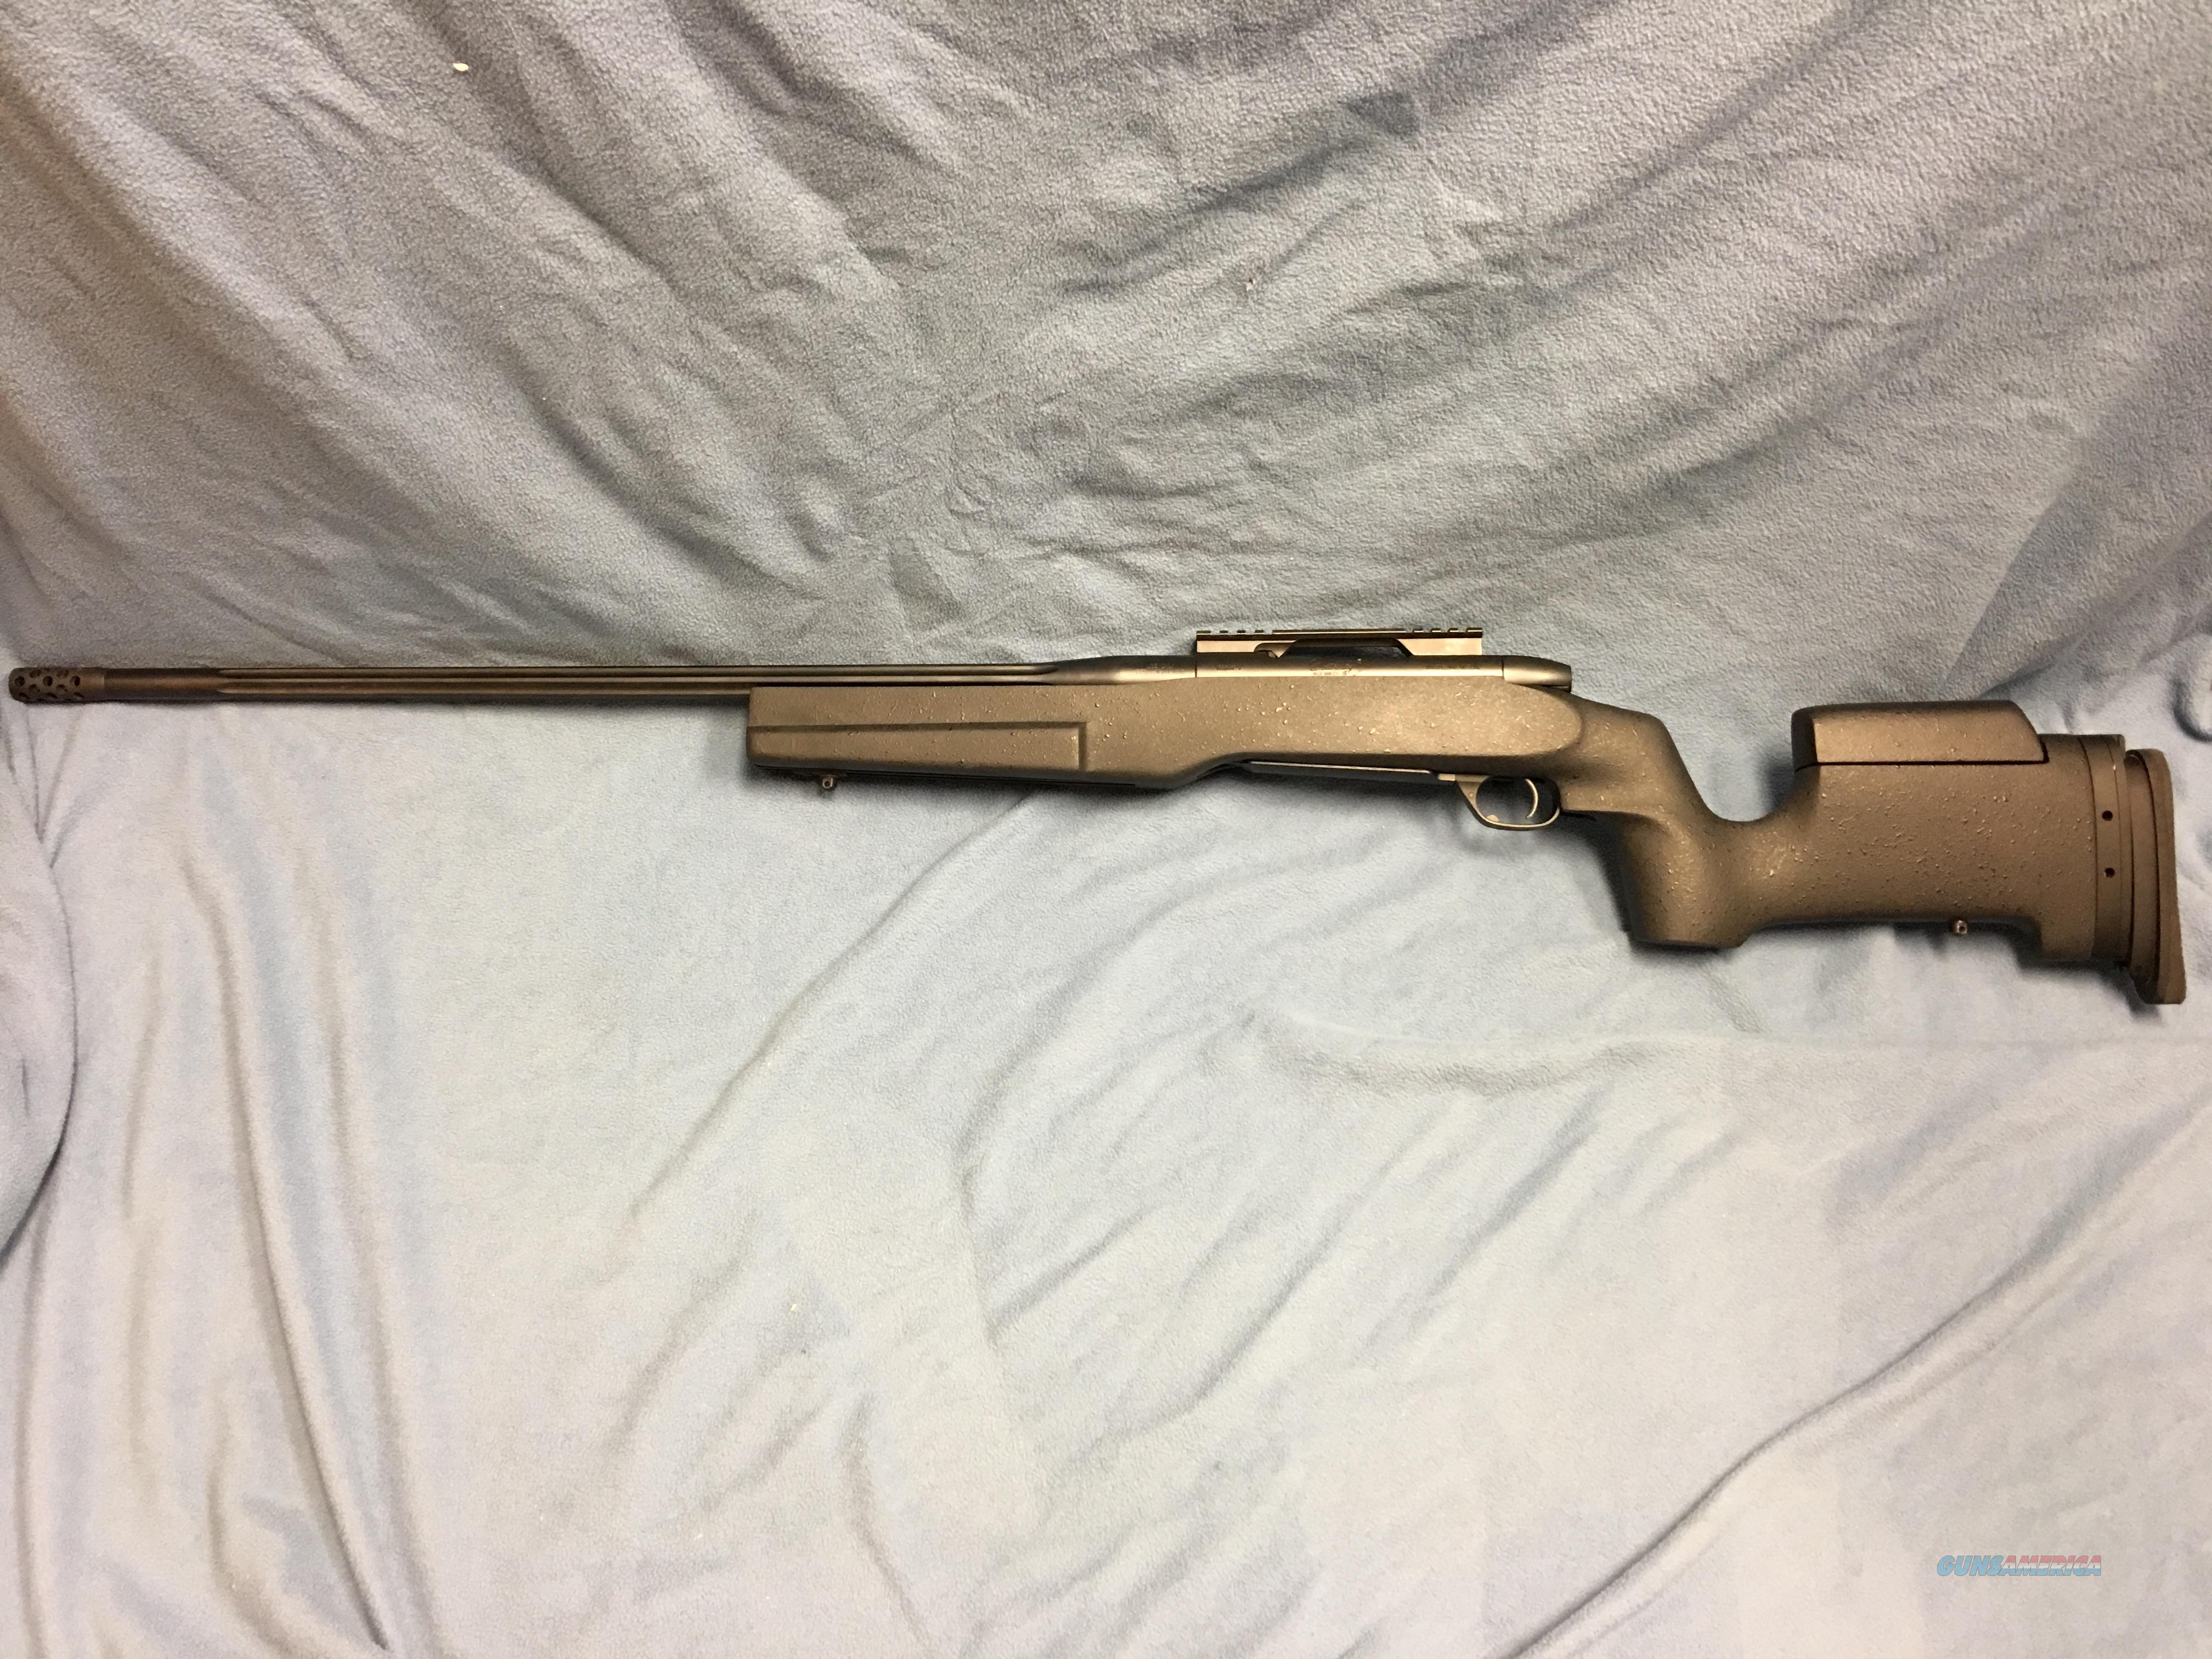 weatherby mark v 338 lapua review